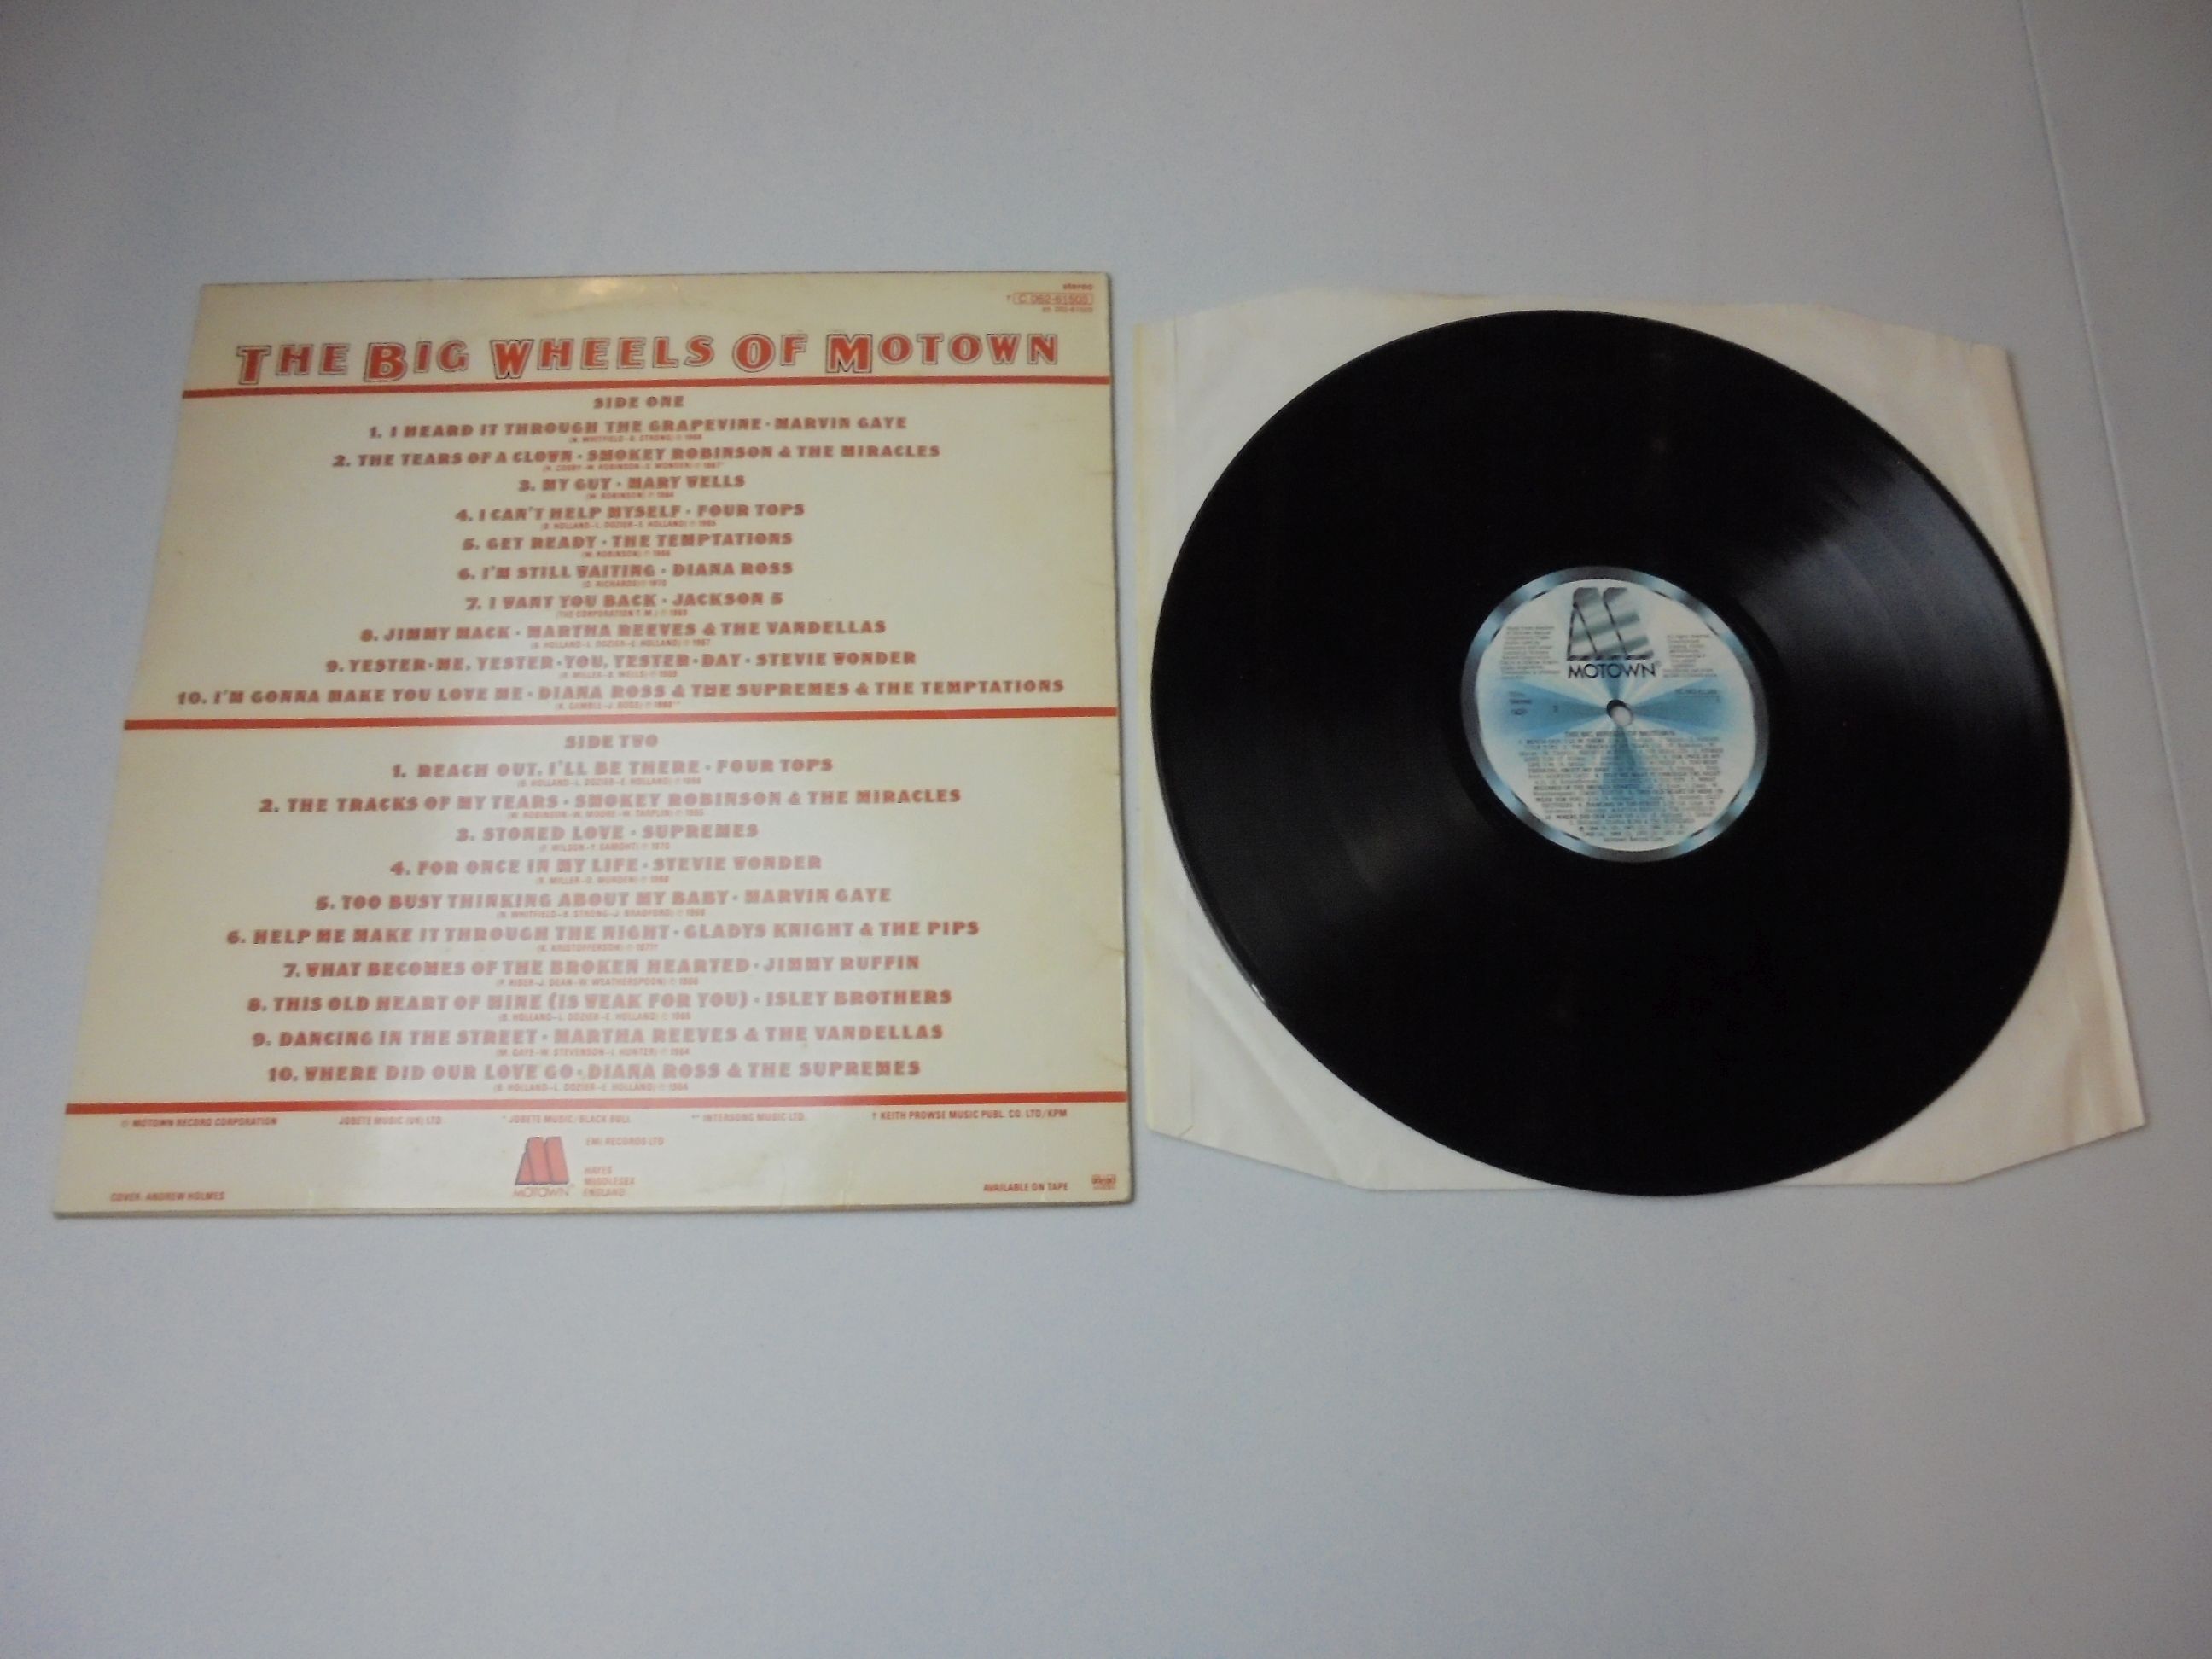 Vinyl - Collection of 7 ealry Rock and Motown Compilation LPs to include Rock Buster, The Island - Image 8 of 21